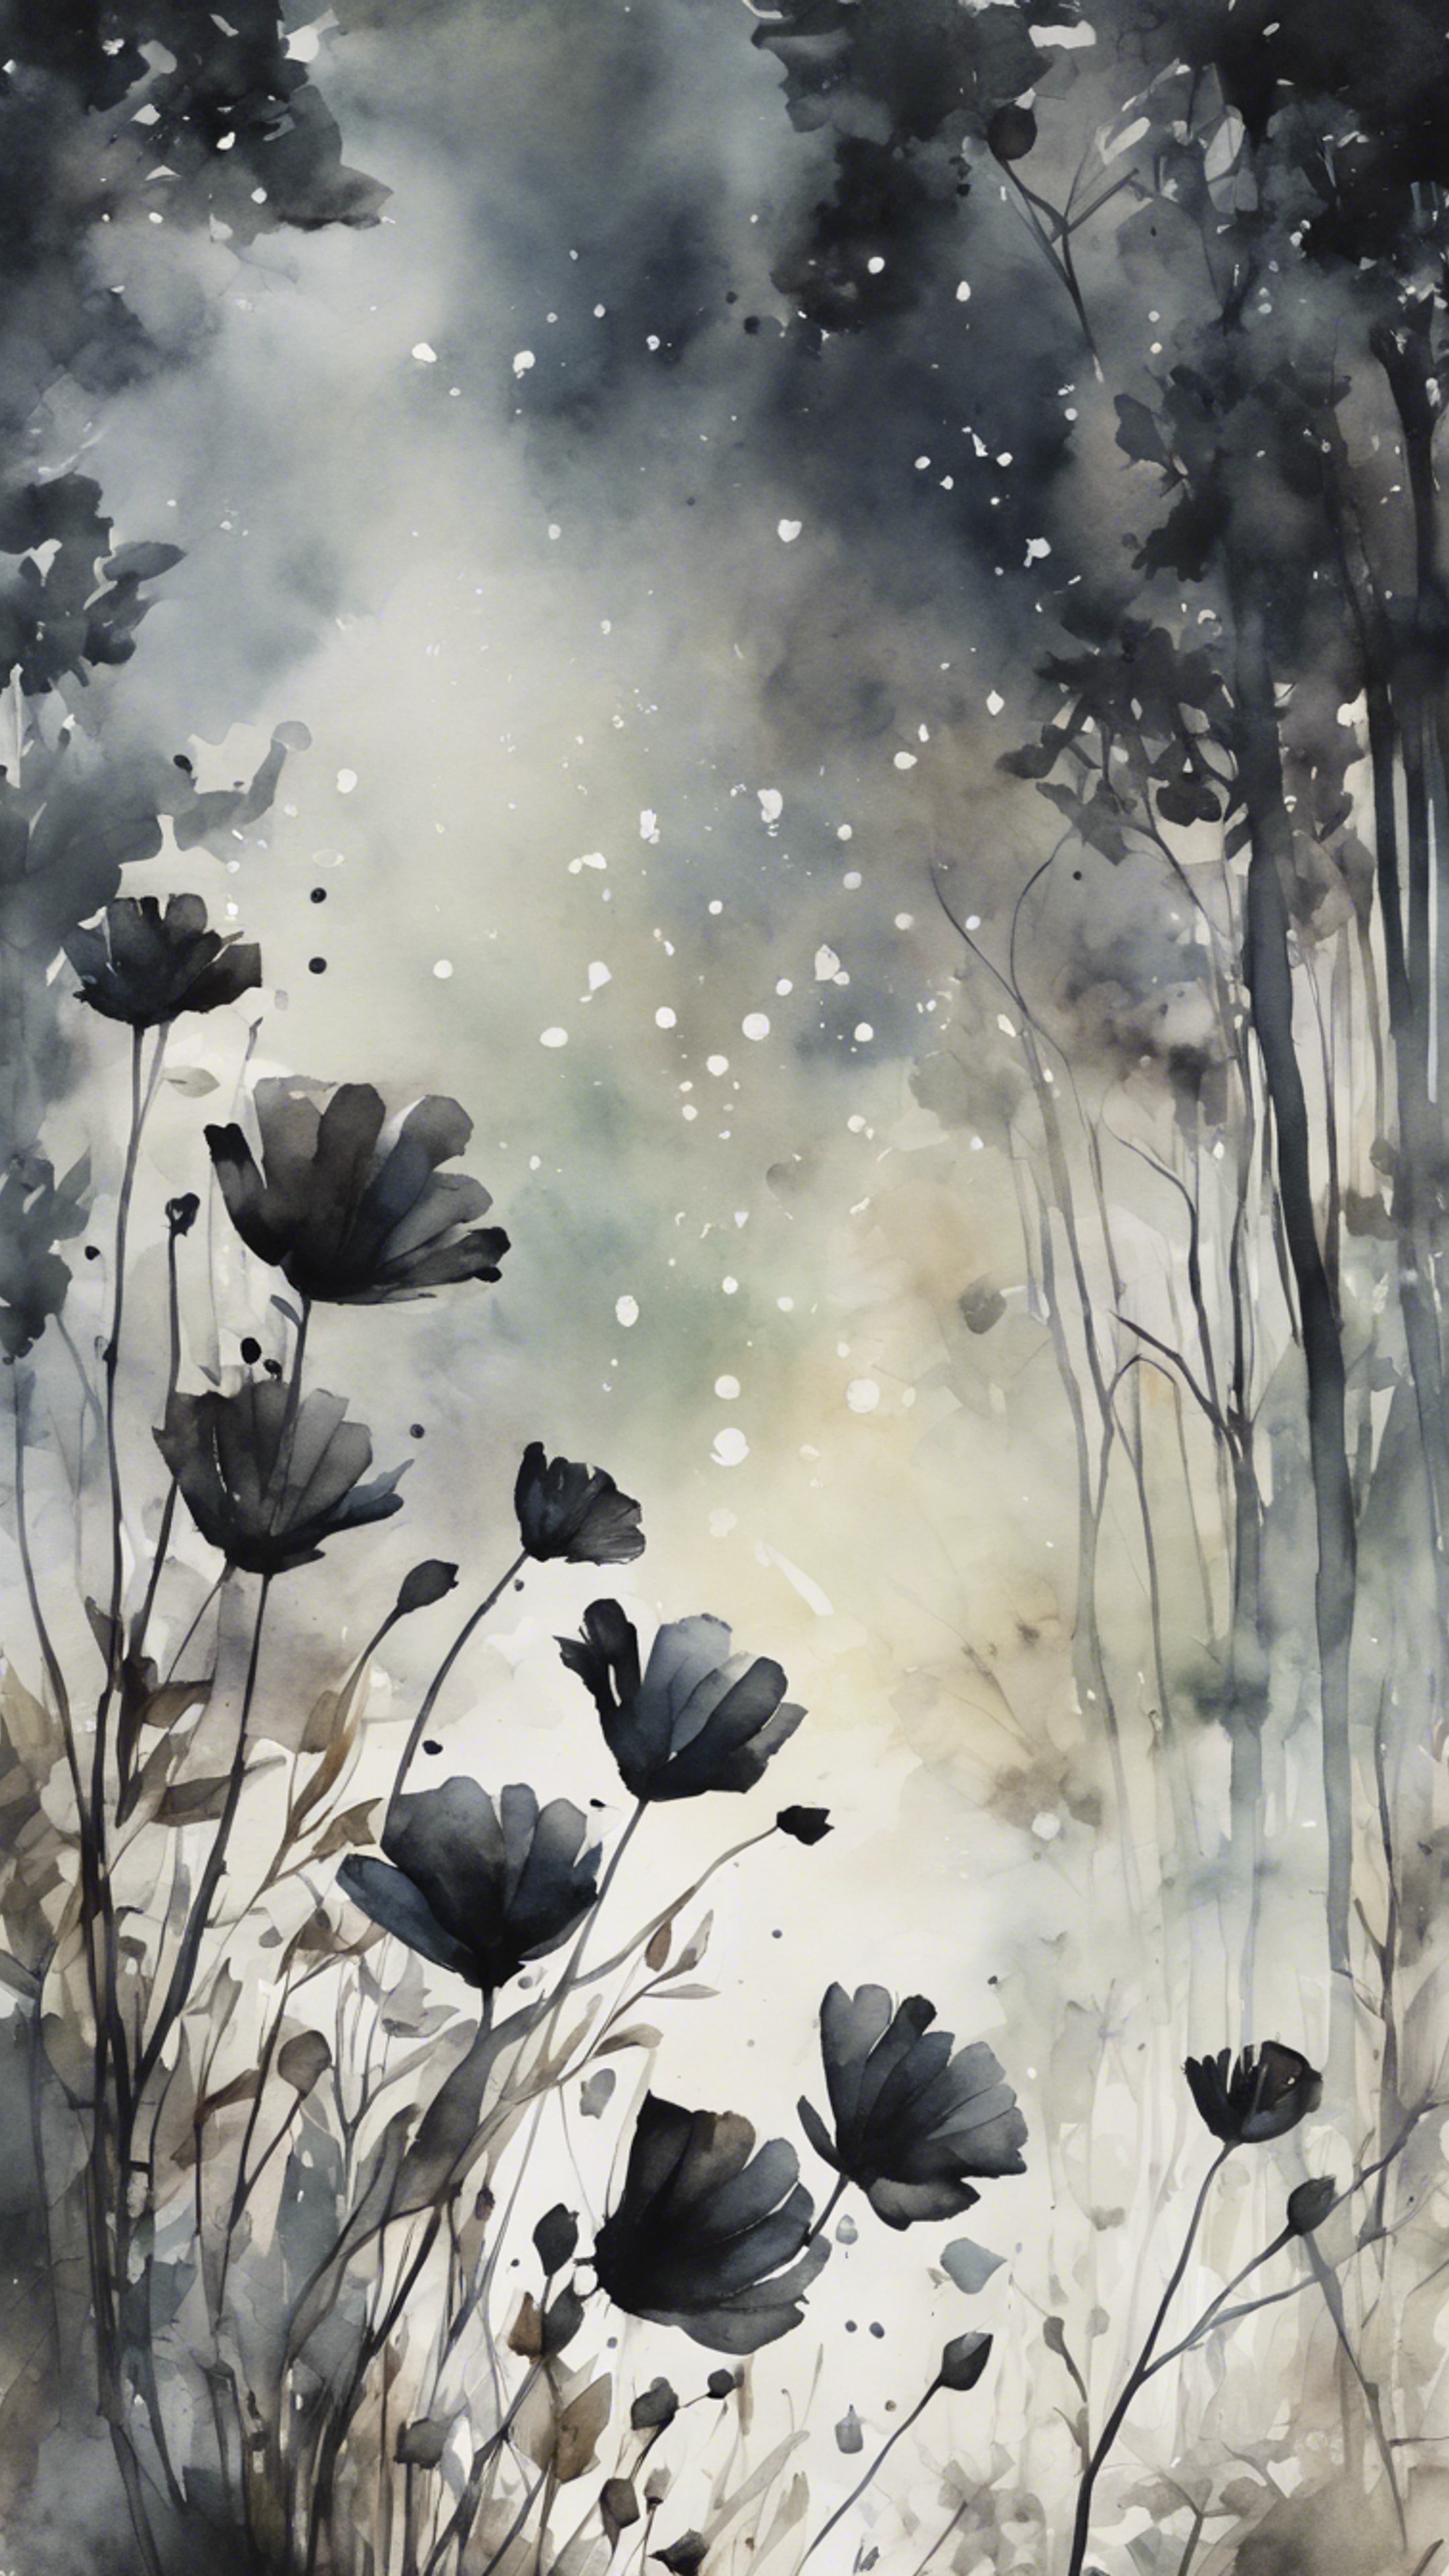 A dreamy watercolor painting depicting black flowers blooming in the heart of a dense forest. Wallpaper[006f57e6dd8144ebb2db]